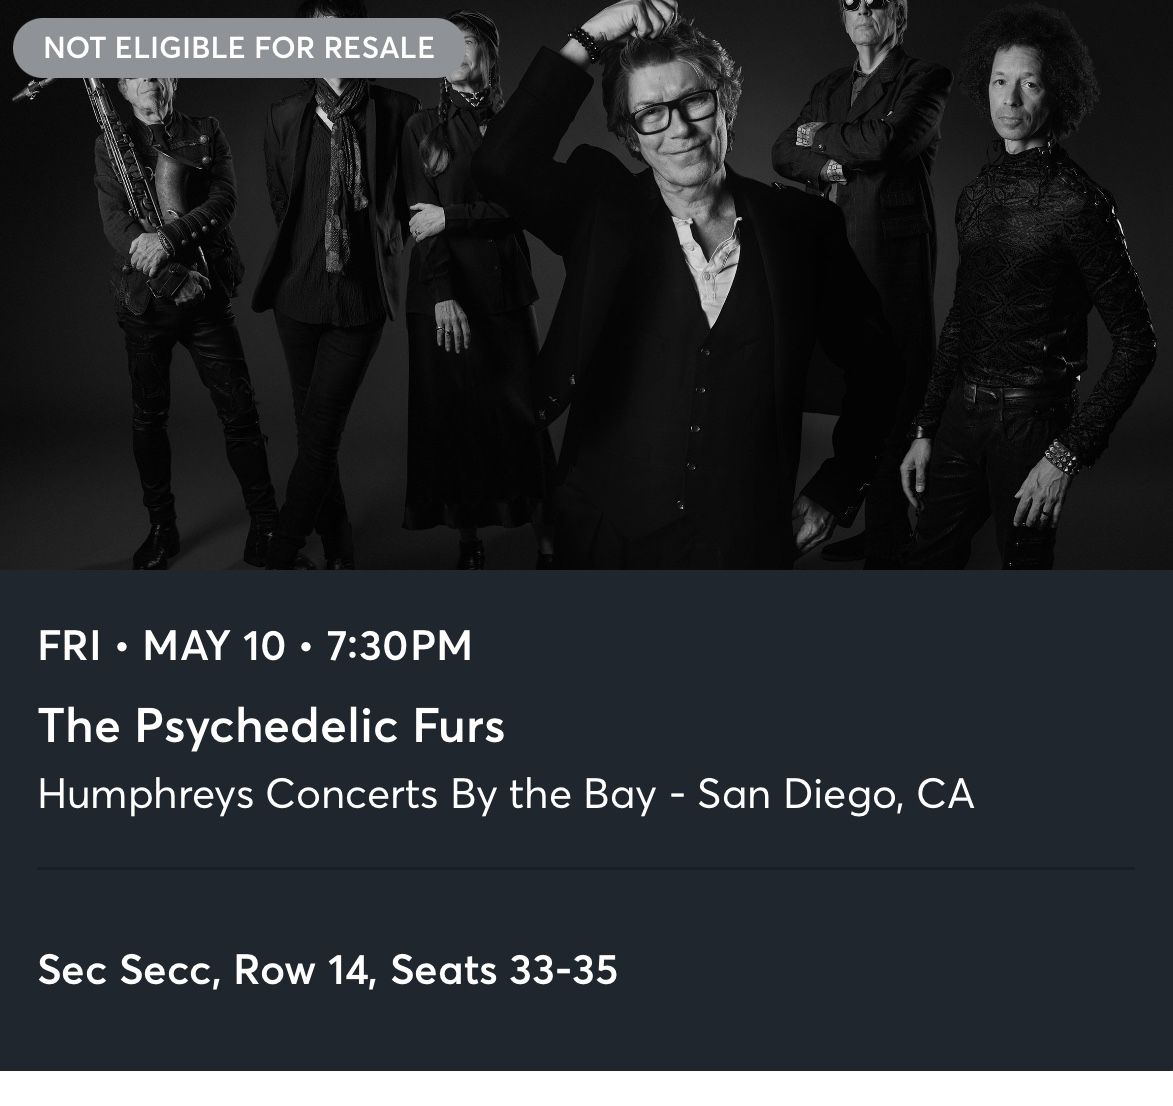 Psychedelic Furs tickets